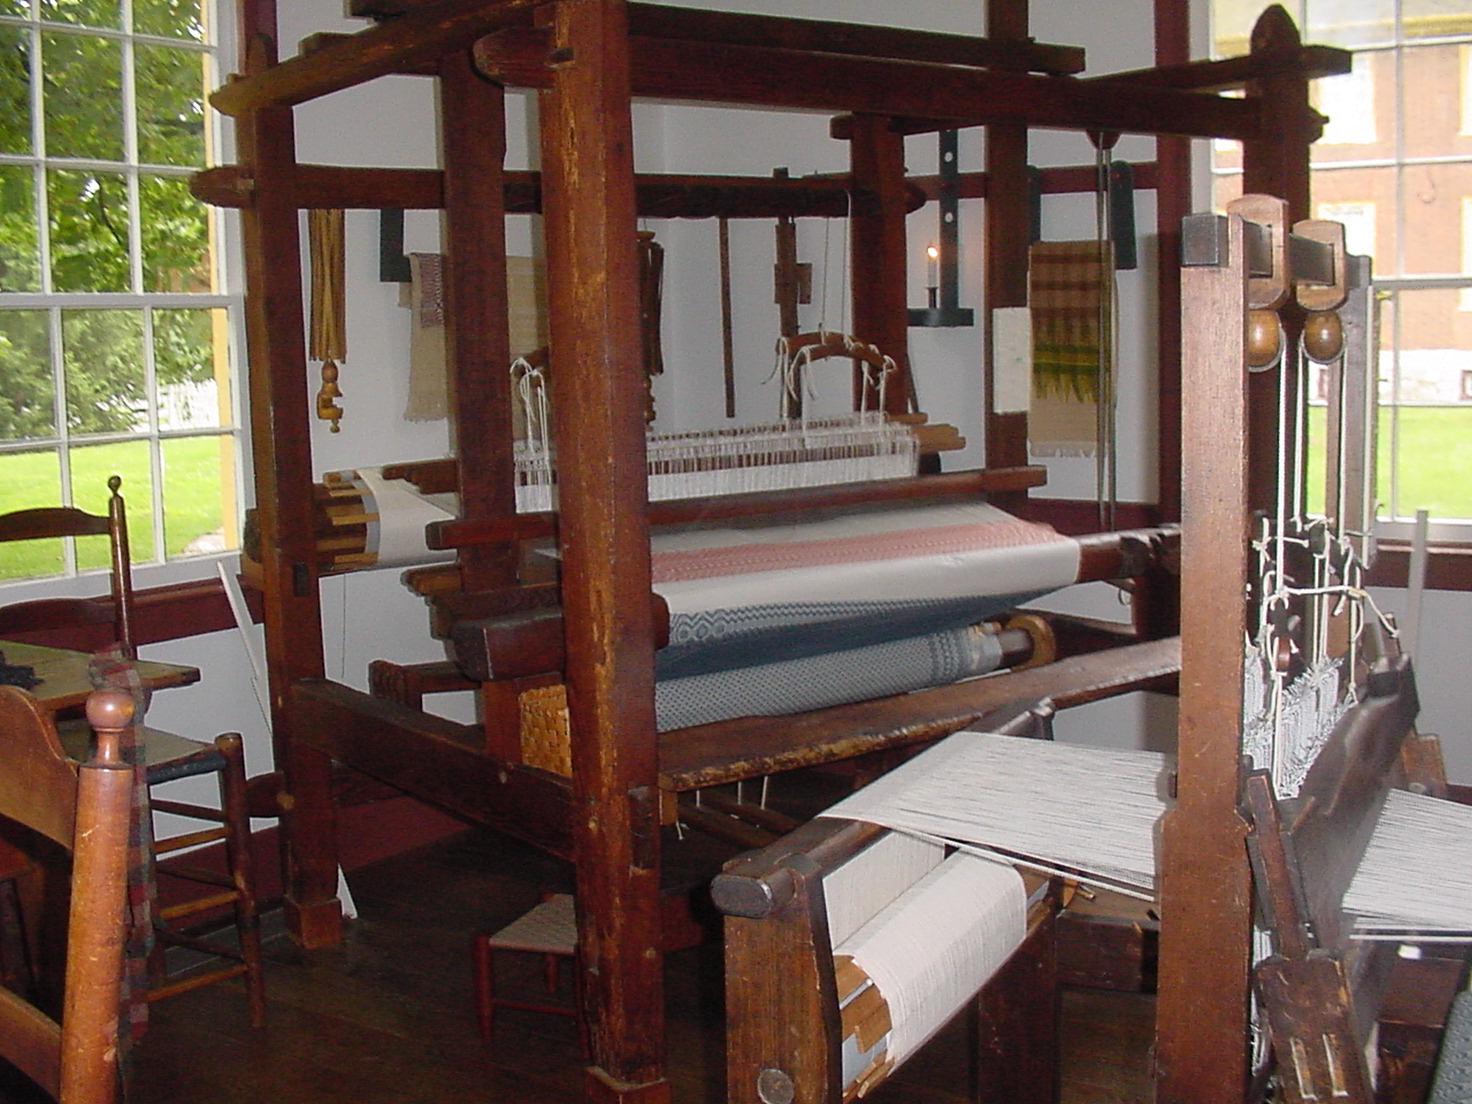 These looms were used for weaving cloth.